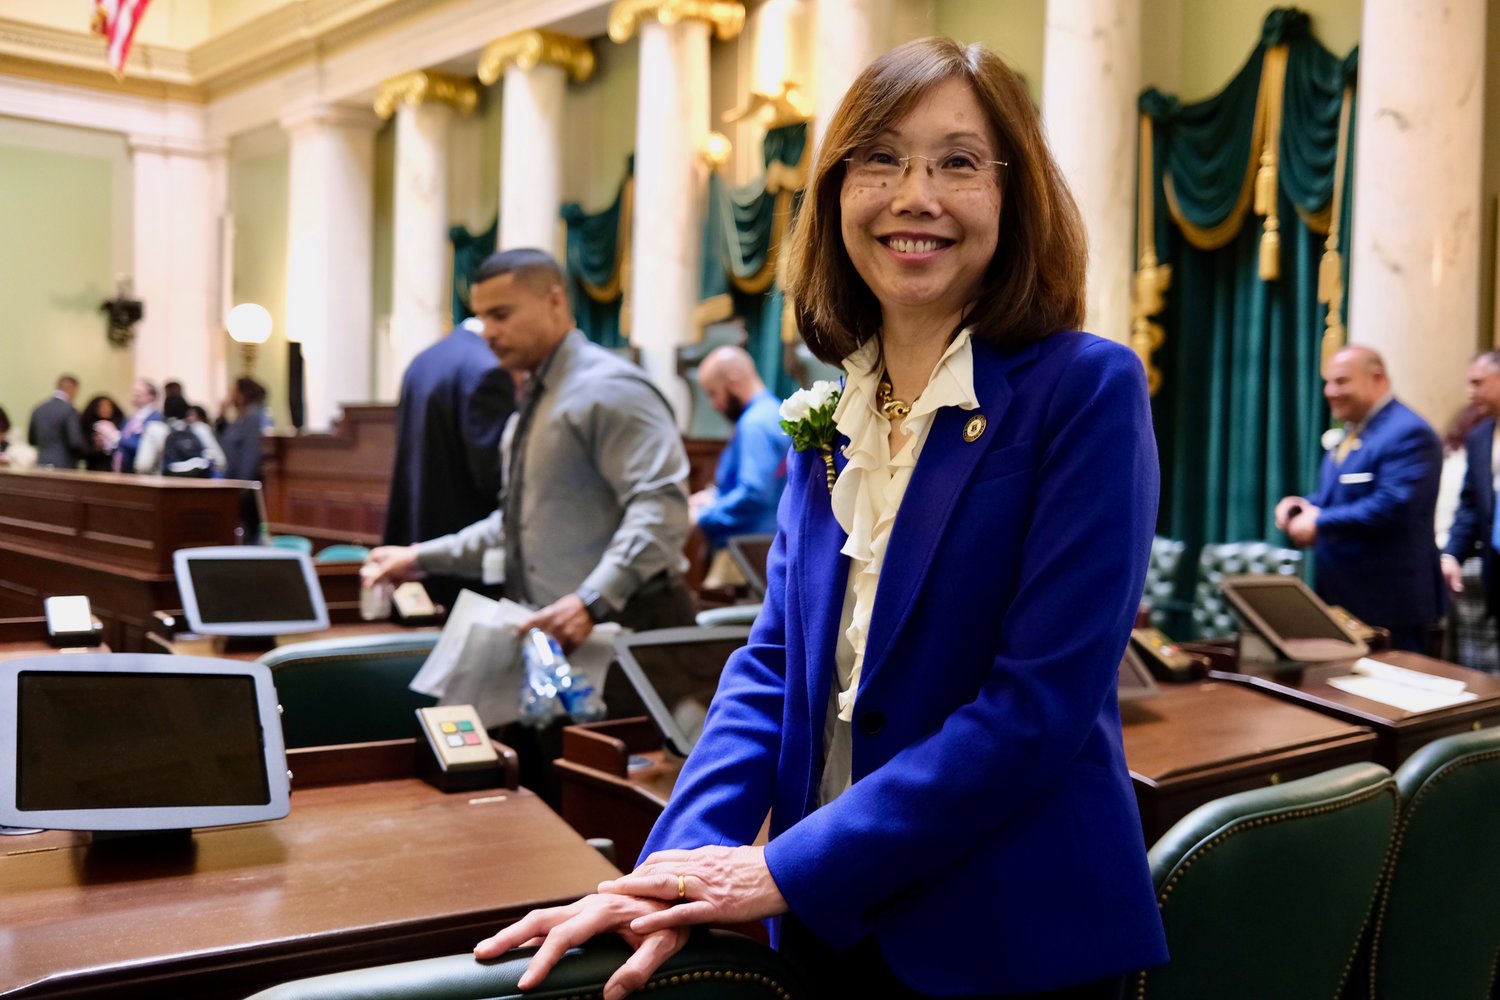 Sen. Linda Ujifusa (D-Dist. 11) at her new desk shortly after being sworn in as a freshman state senator. She and Sen. Victoria Gu of Charlestown became Rhode Island’s first two Asian-American state legislators on Tuesday.